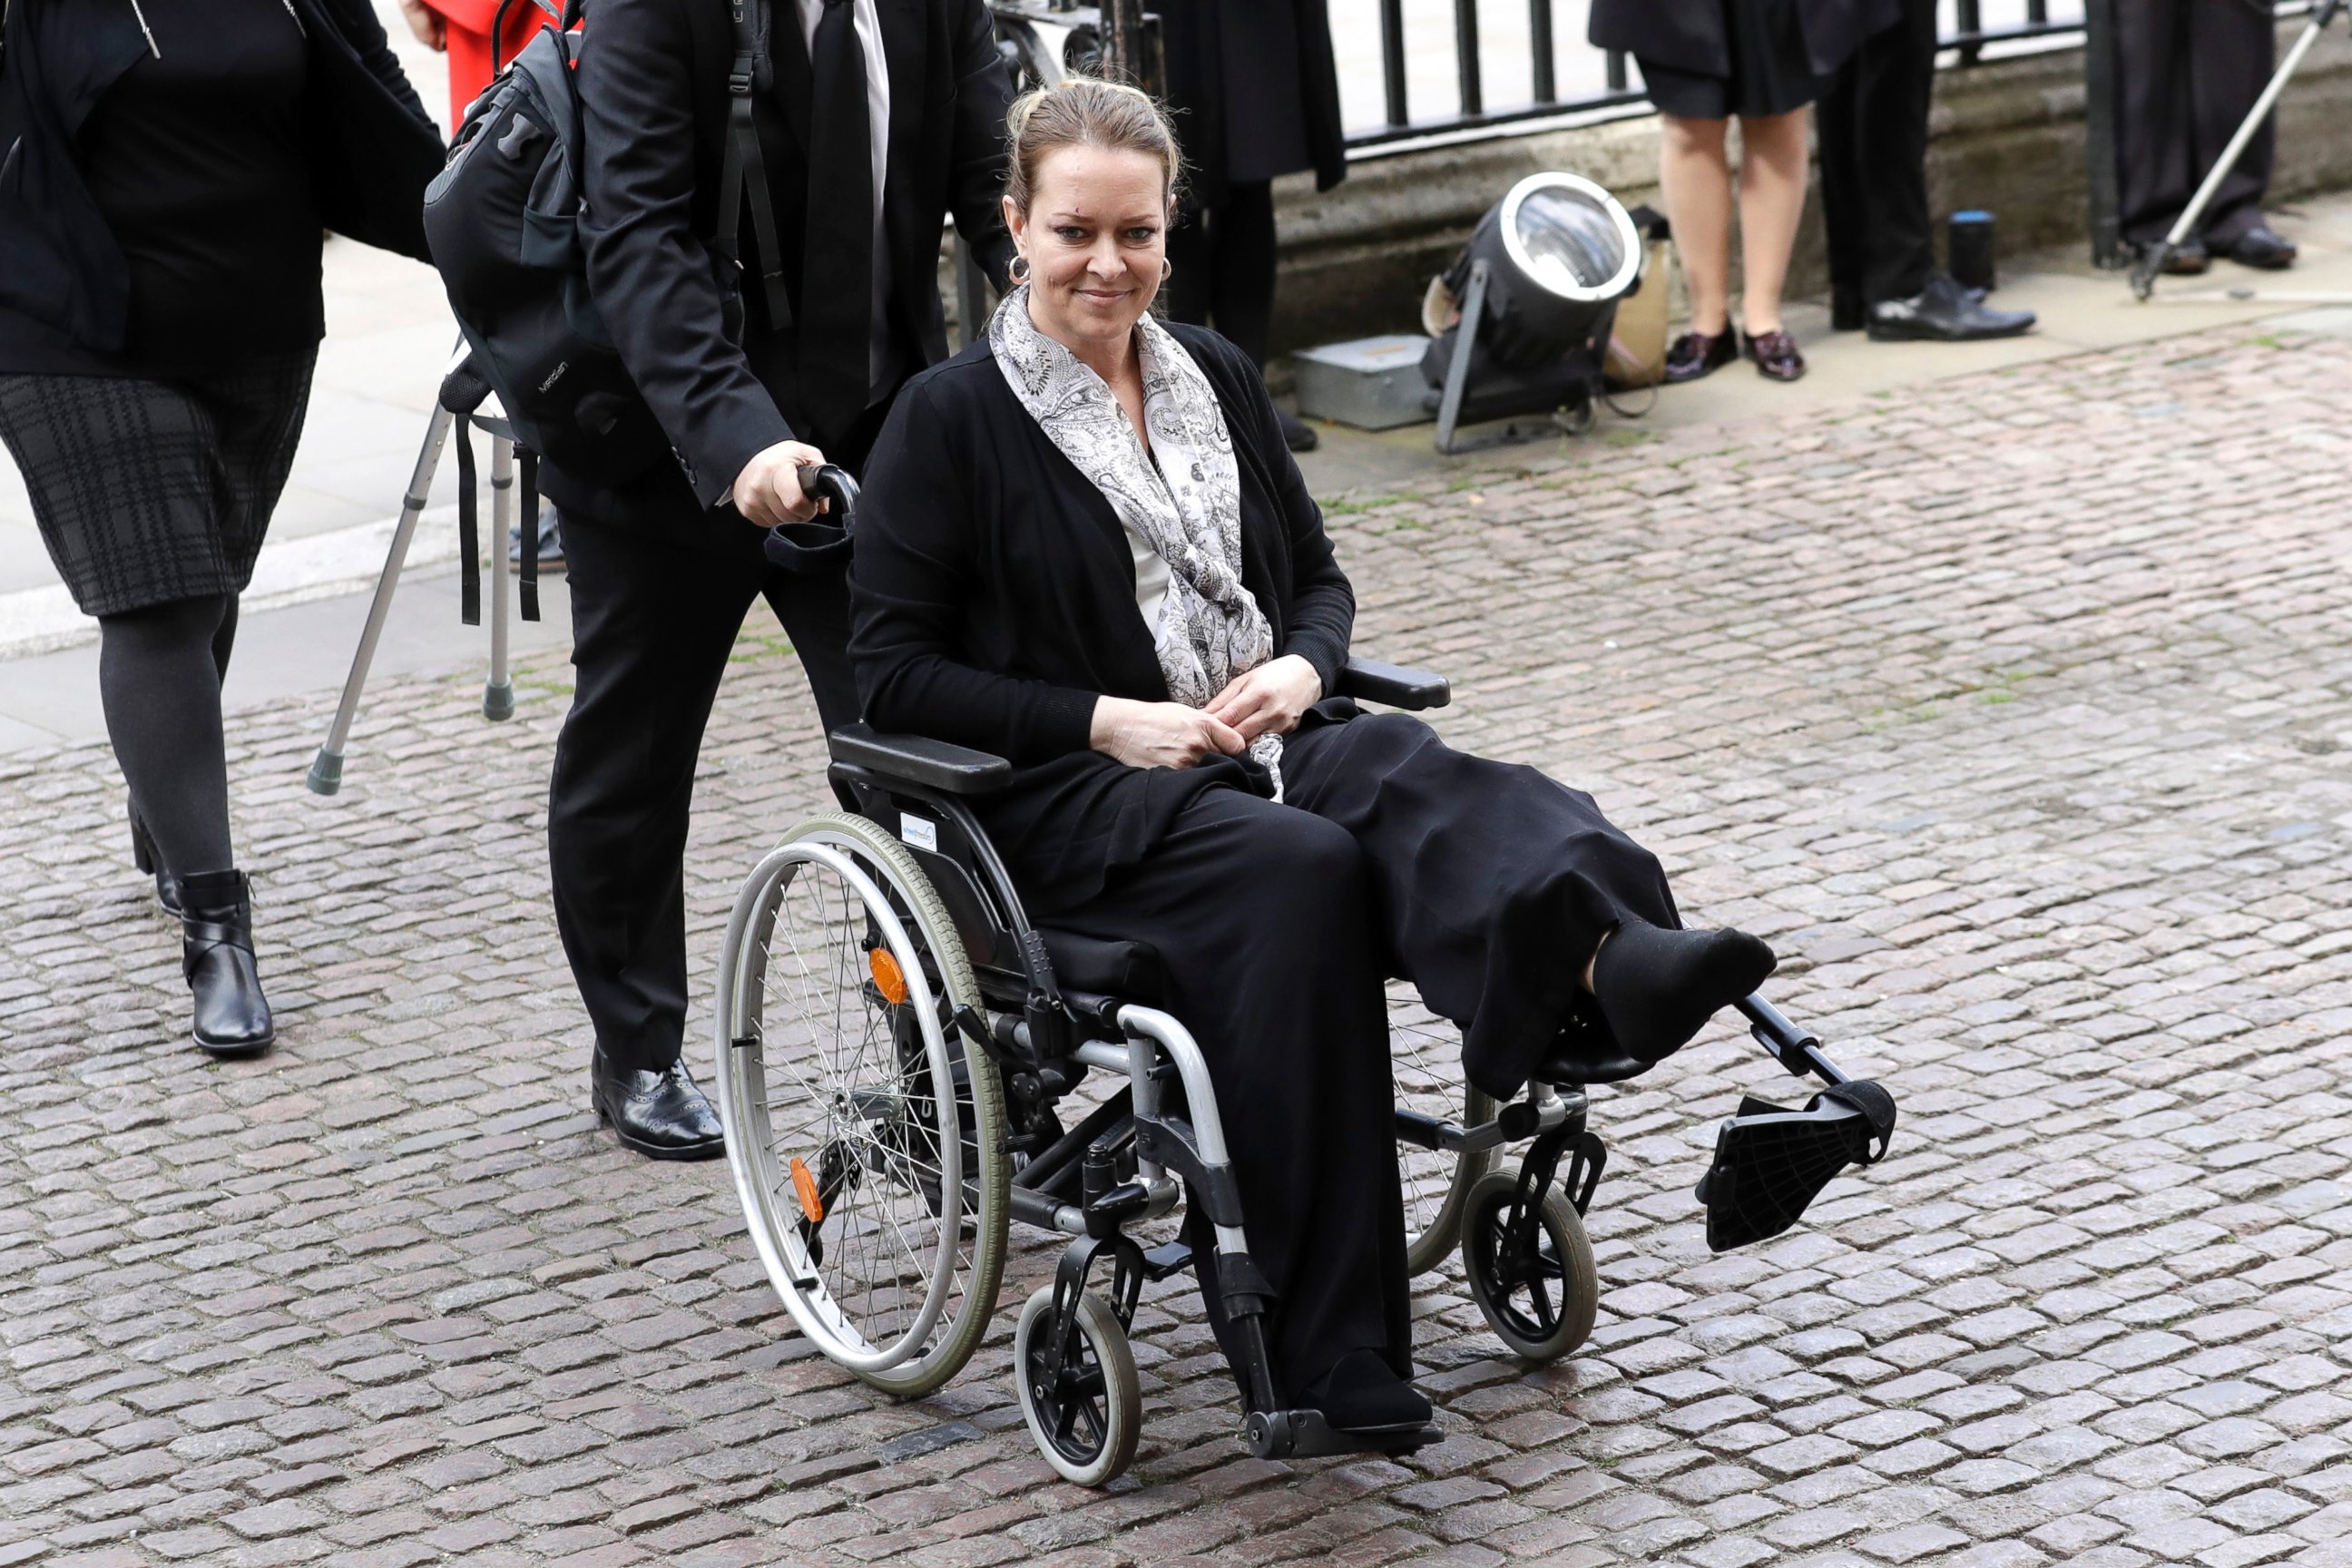 PHOTO: Injured U.S. tourist Melissa Cochran, whose husband Kurt Cohran was killed in the March 22 London terror attack, arrives for a "Service of Hope" at Westminster Abbey in London, April 5, 2017. 